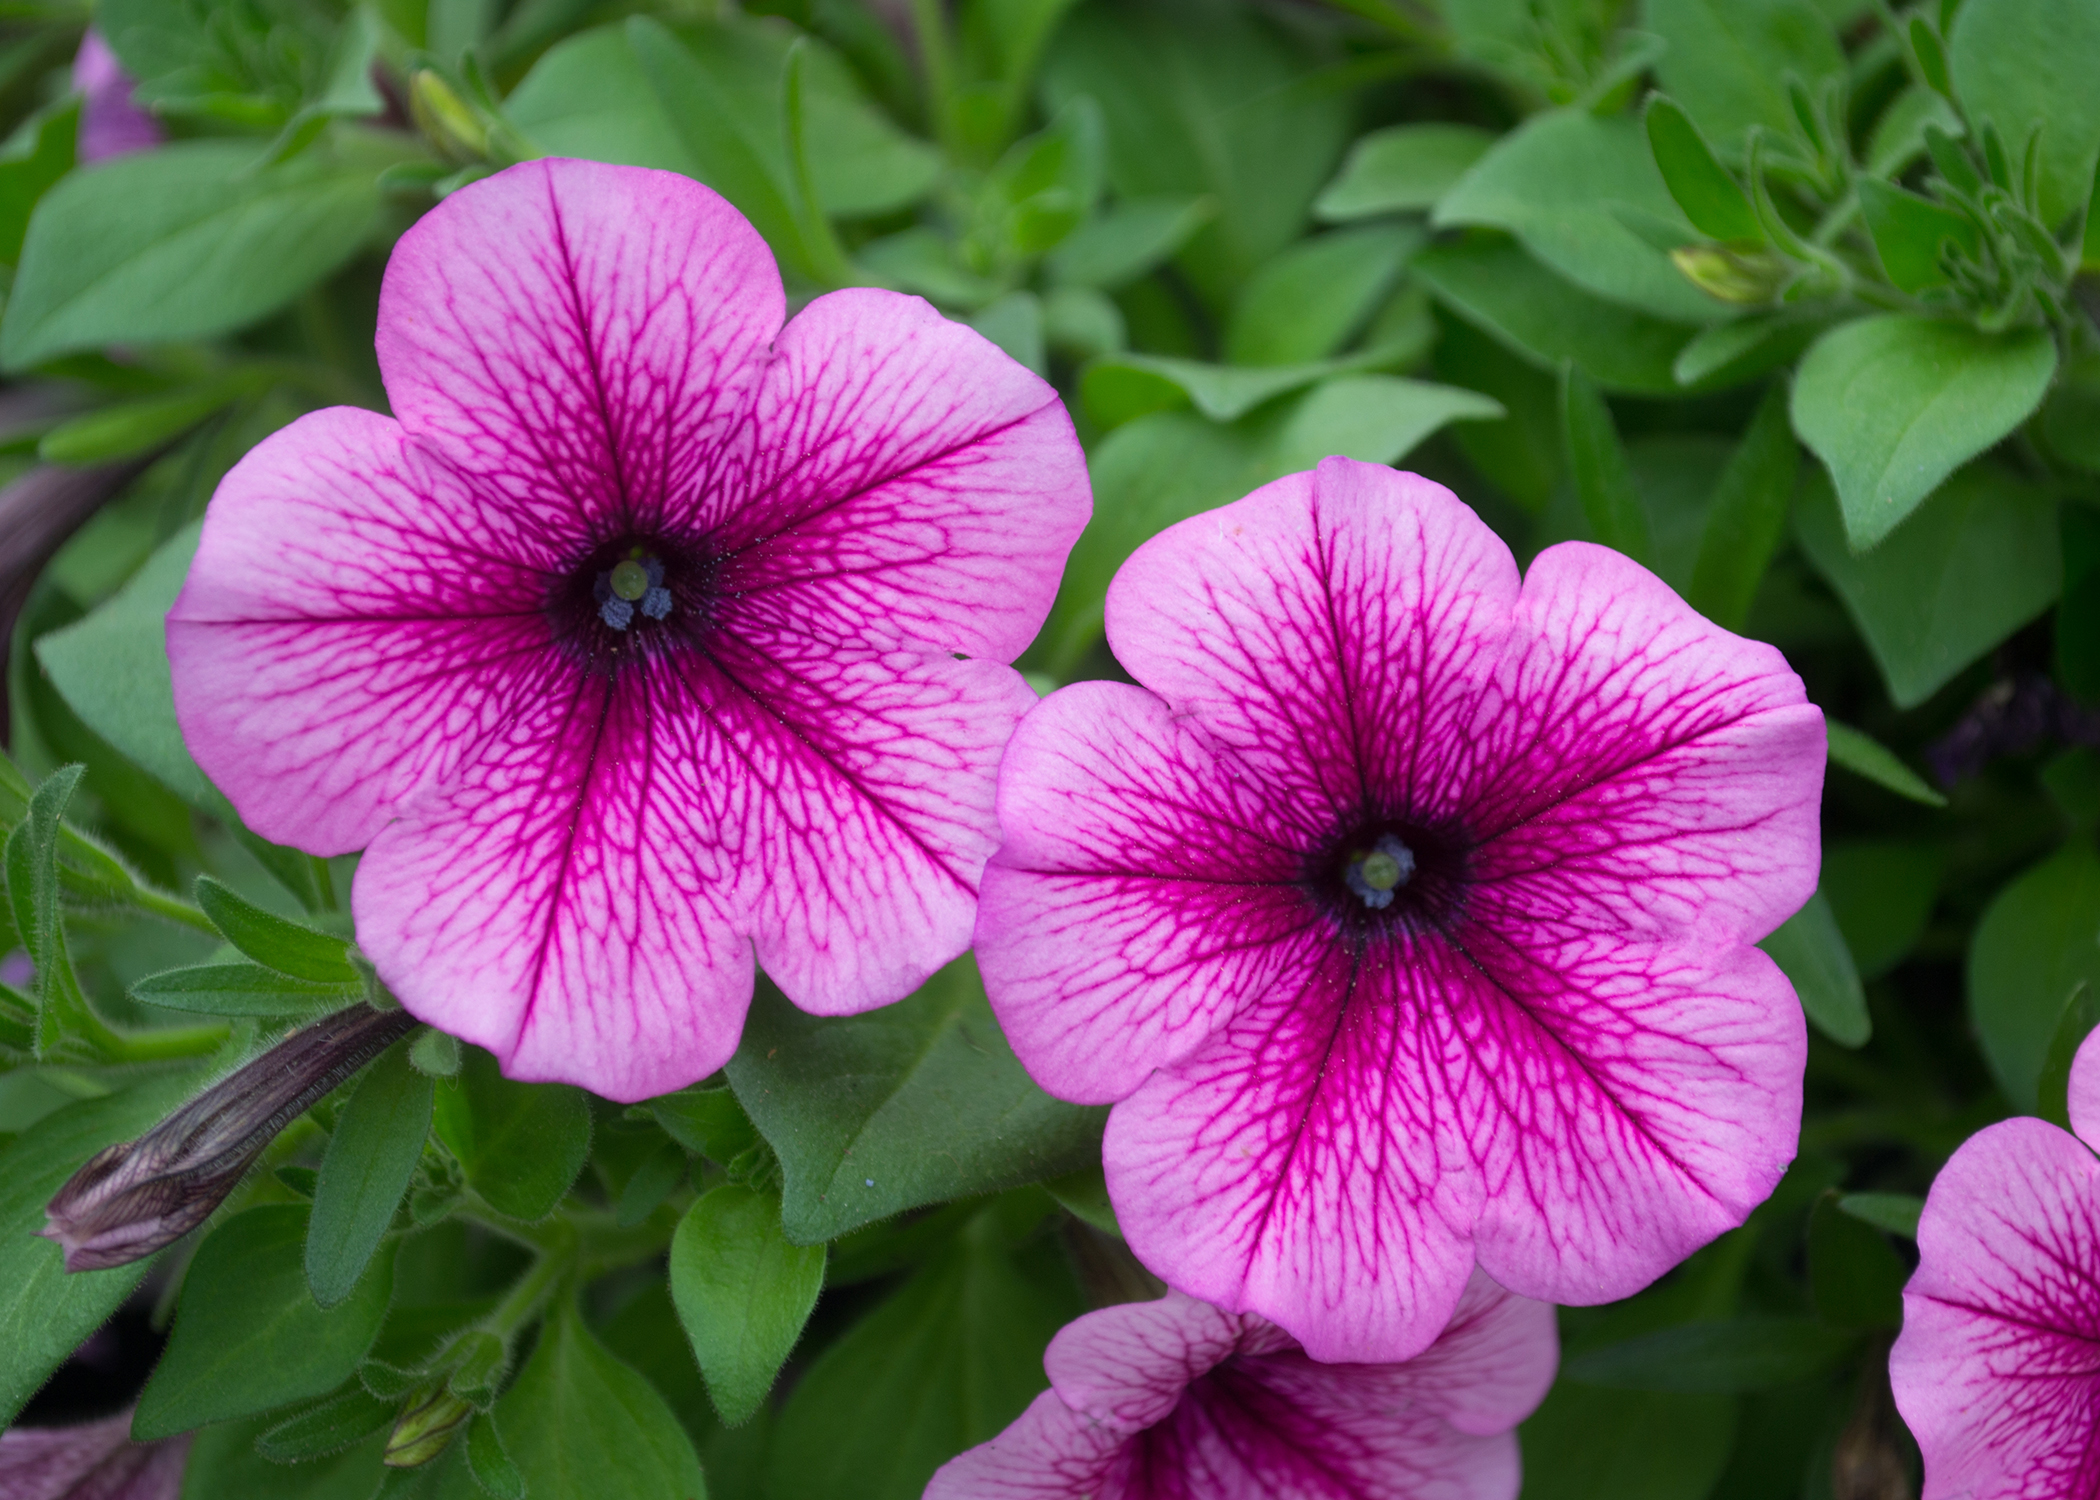 Two pink flowers have dark centers.